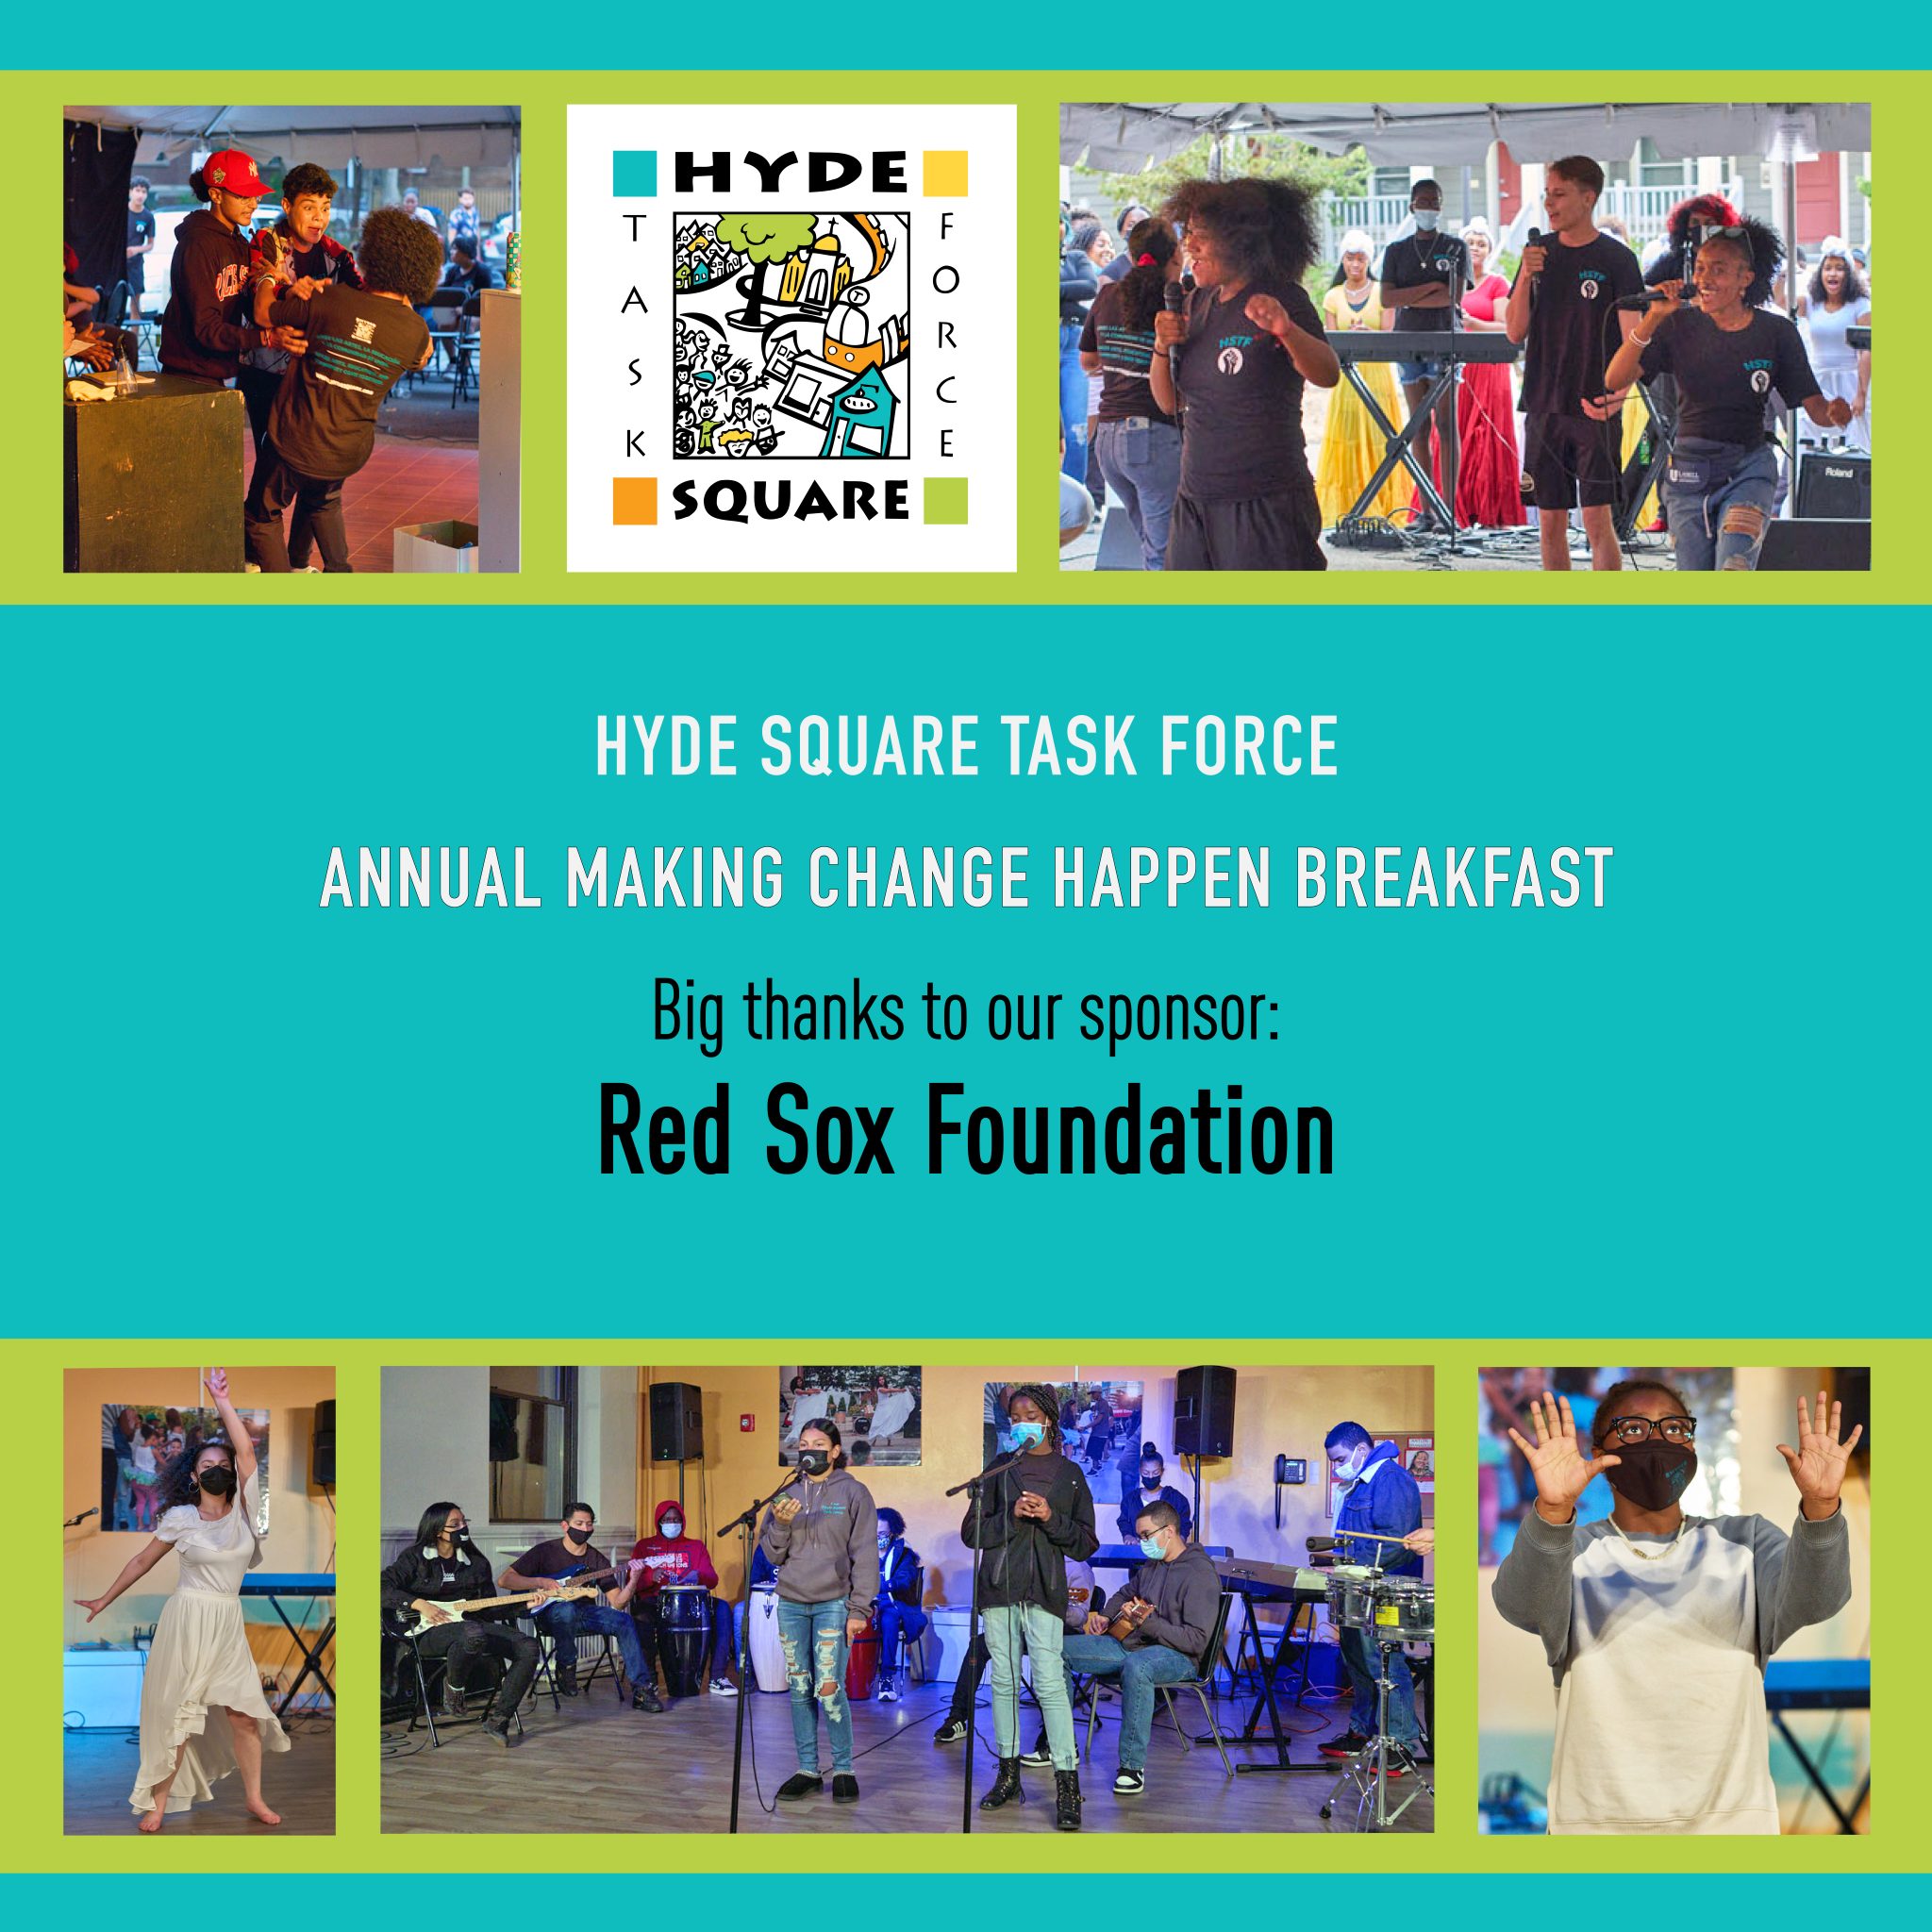 The Annual Making Change Happen Breakfast is in one week and today we're sharing major appreciation for the Red Sox Foundation! It isn't too late to join us for the event. Click here to learn more about the event and get your ticket: https://www.eventbrite.com/e/annual-making-change-happen-breakfast-2022-tickets-418245953907